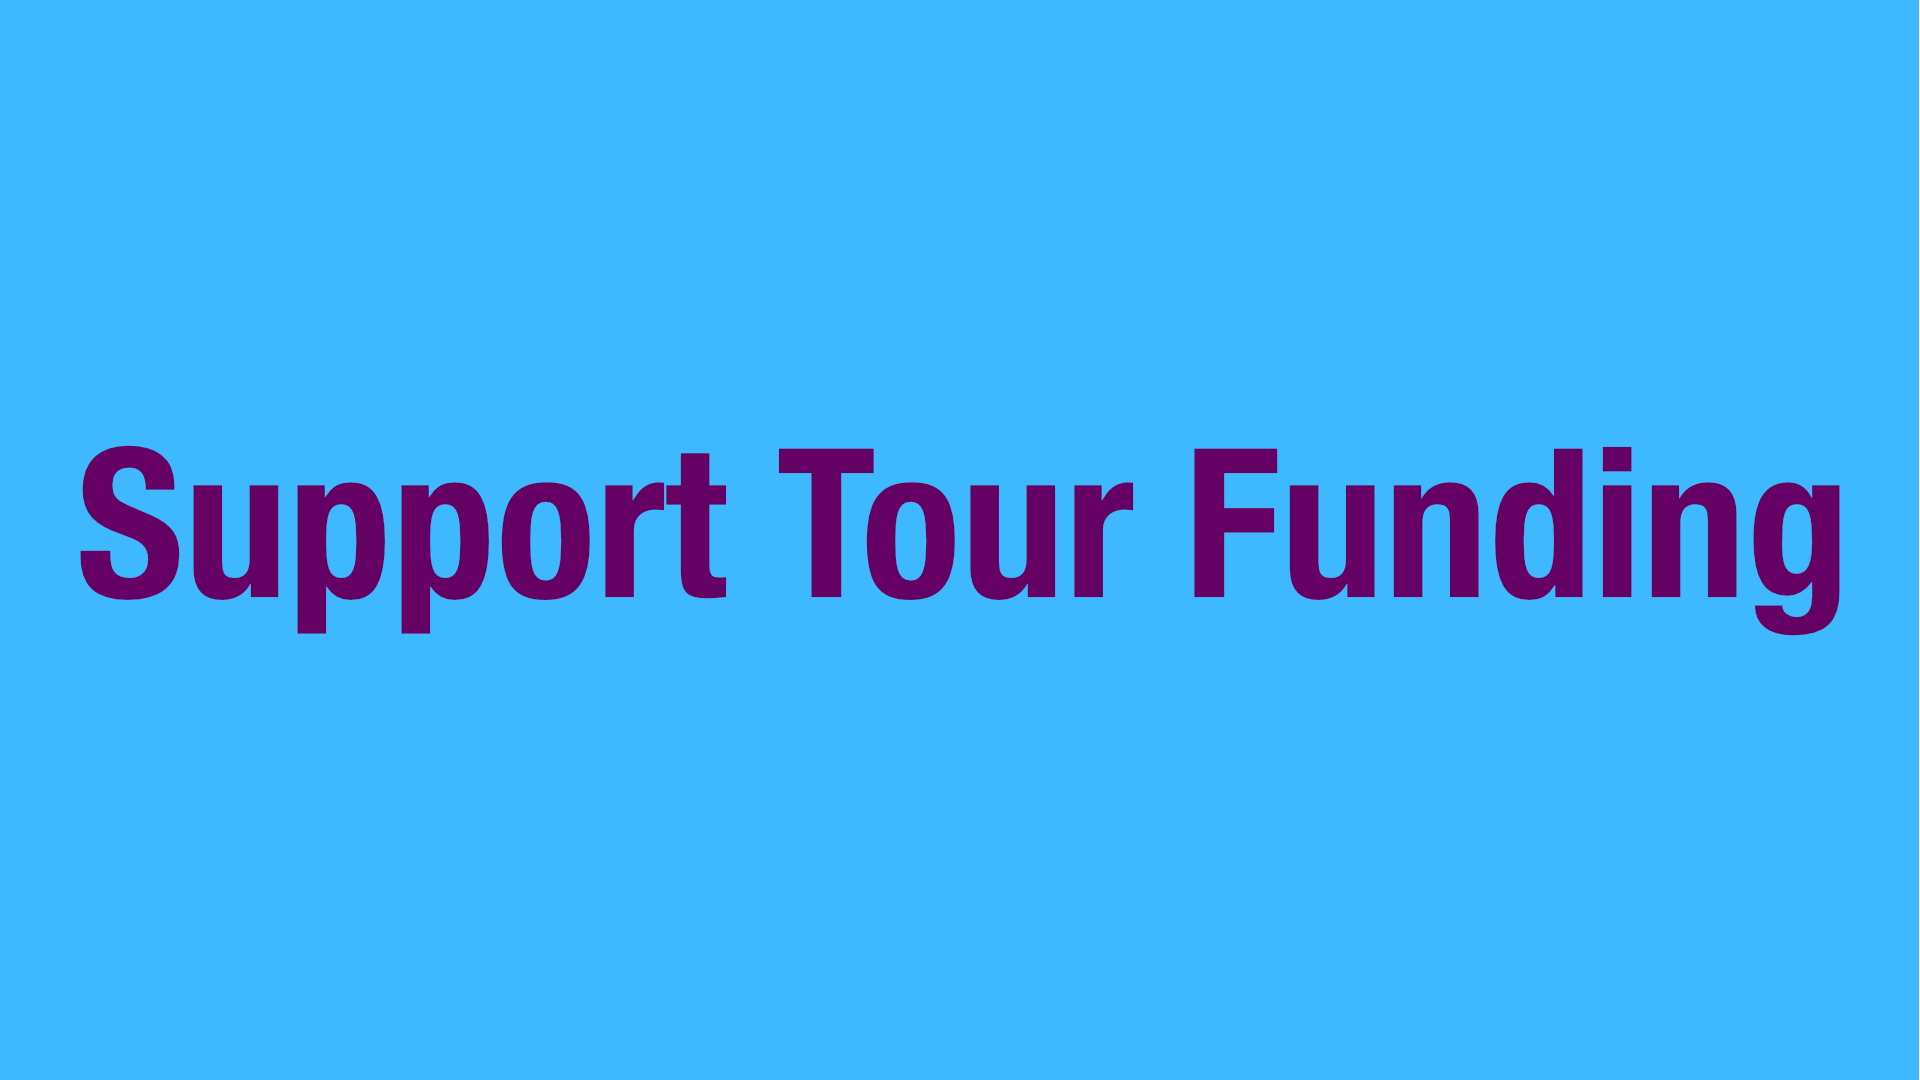 Support Tour Funding